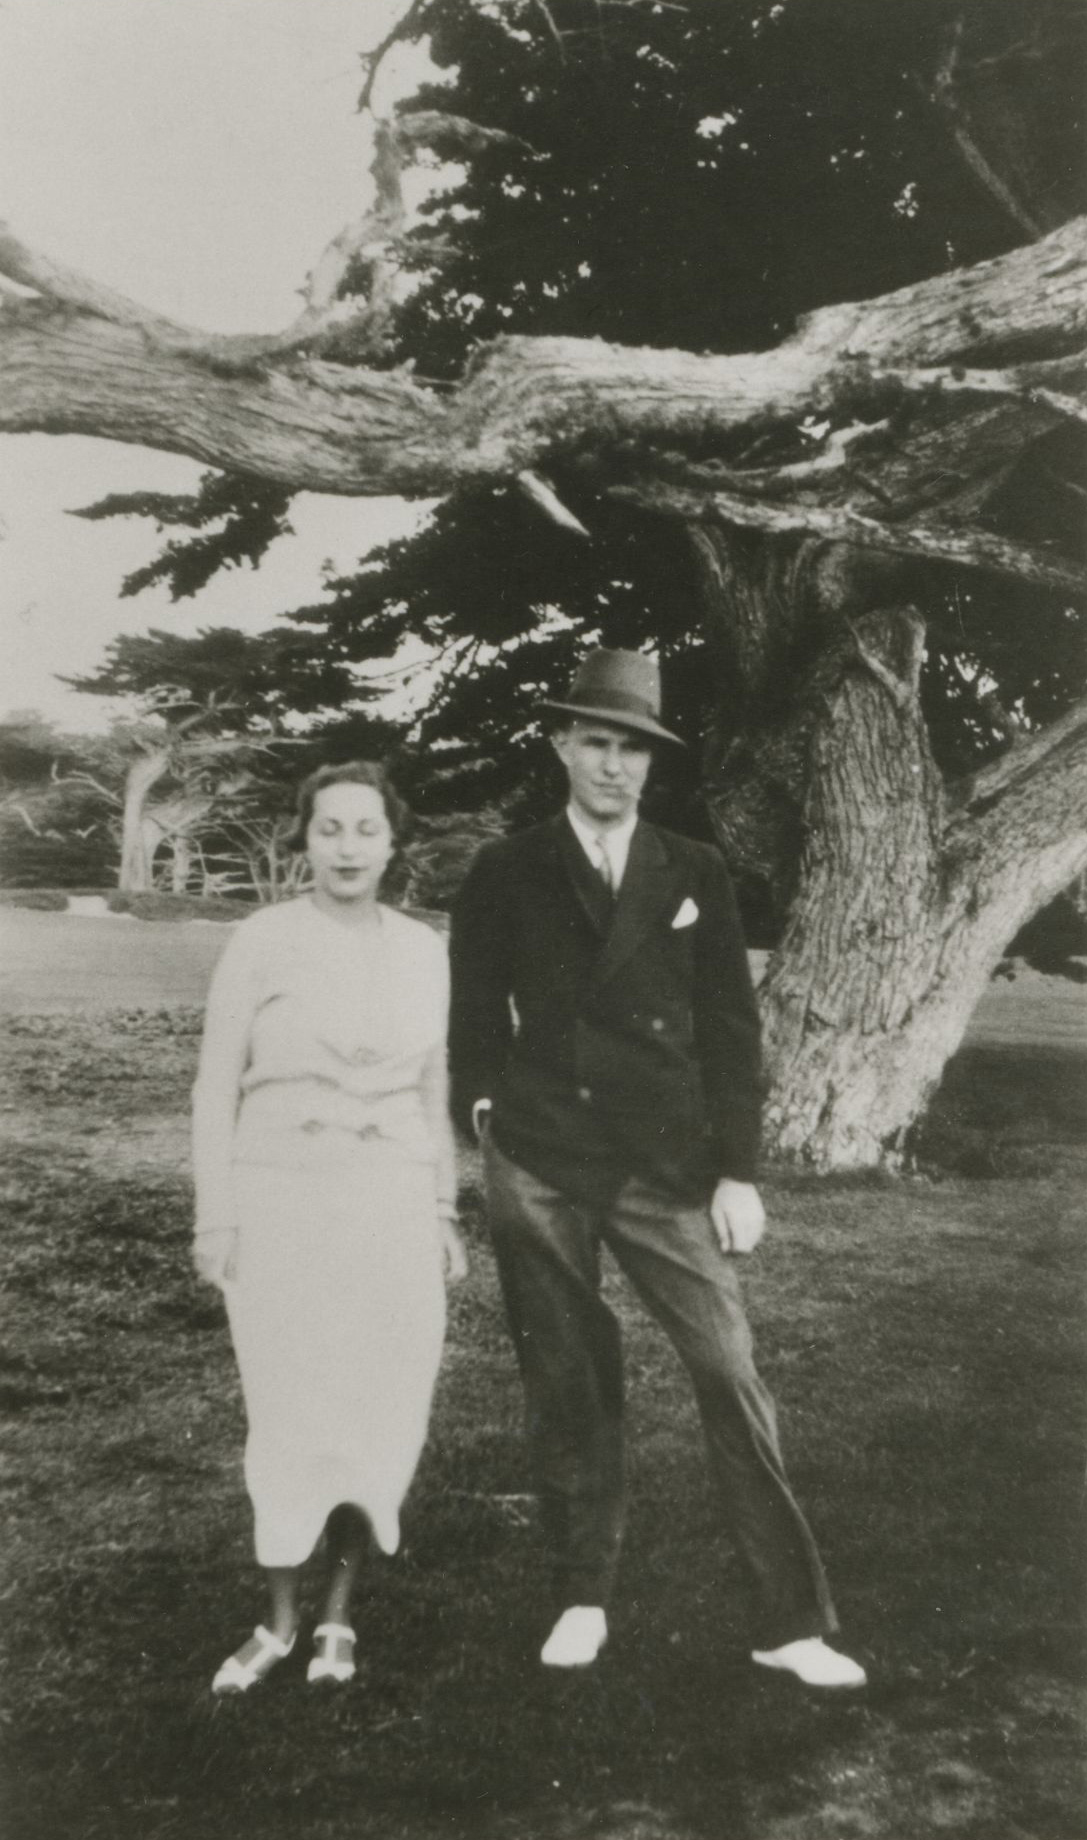 Motherwell and Jane Sommerich in Monterey-Carmel, California, 1934